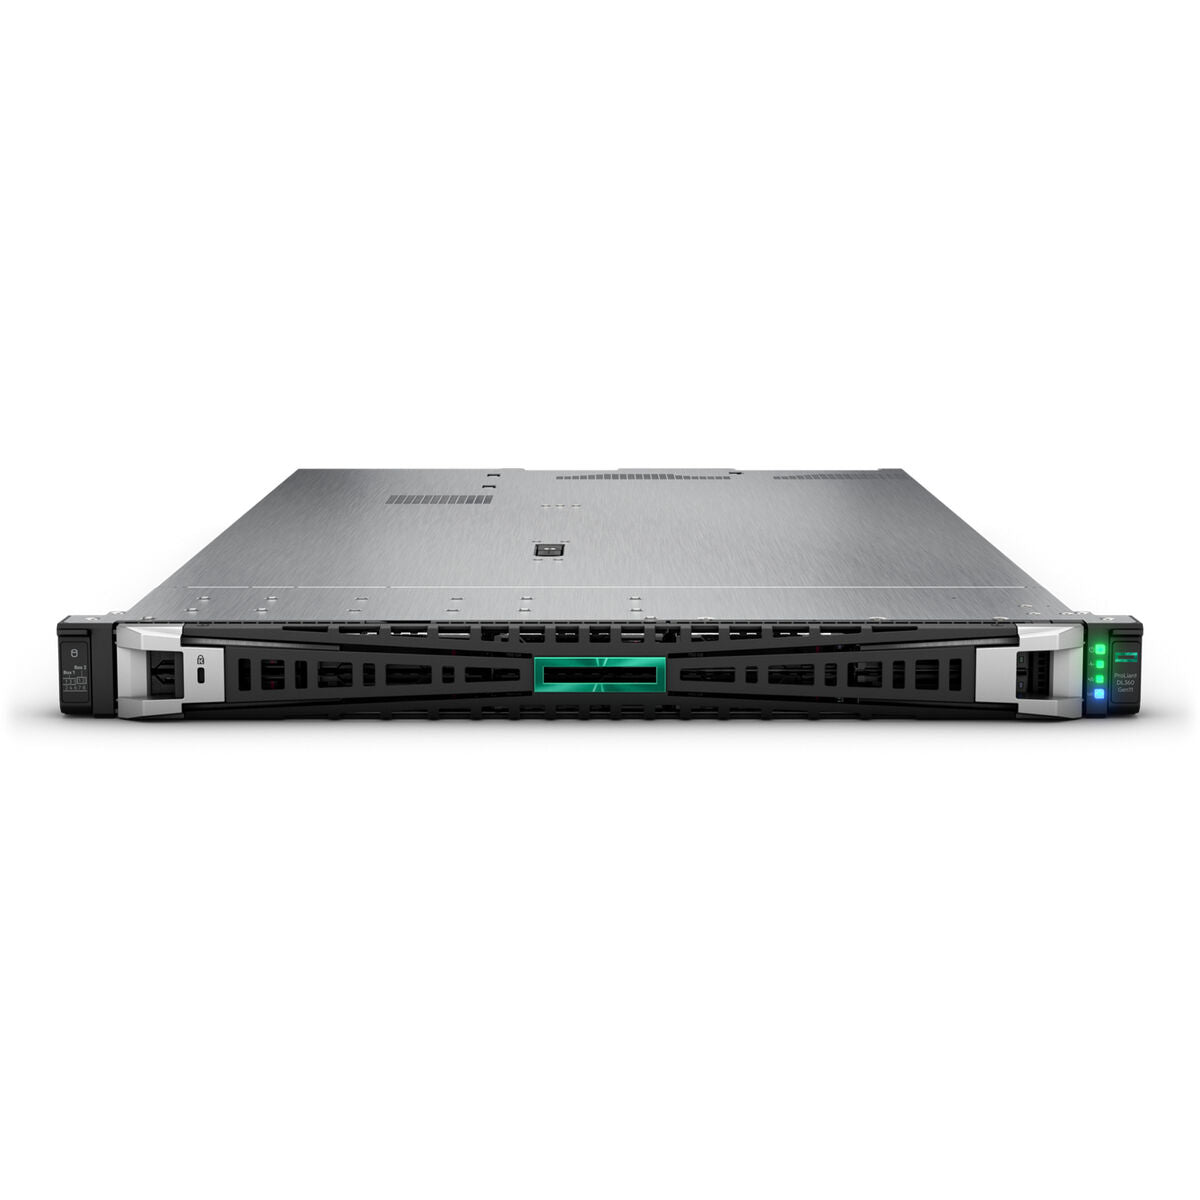 Server HPE P51932-421 32 GB RAM, HPE, Computing, server-hpe-p51932-421-32-gb-ram, :480 GB, Brand_HPE, category-reference-2609, category-reference-2791, category-reference-2799, category-reference-t-19685, category-reference-t-19905, computers / components, Condition_NEW, office, Price_+ 1000, Teleworking, RiotNook